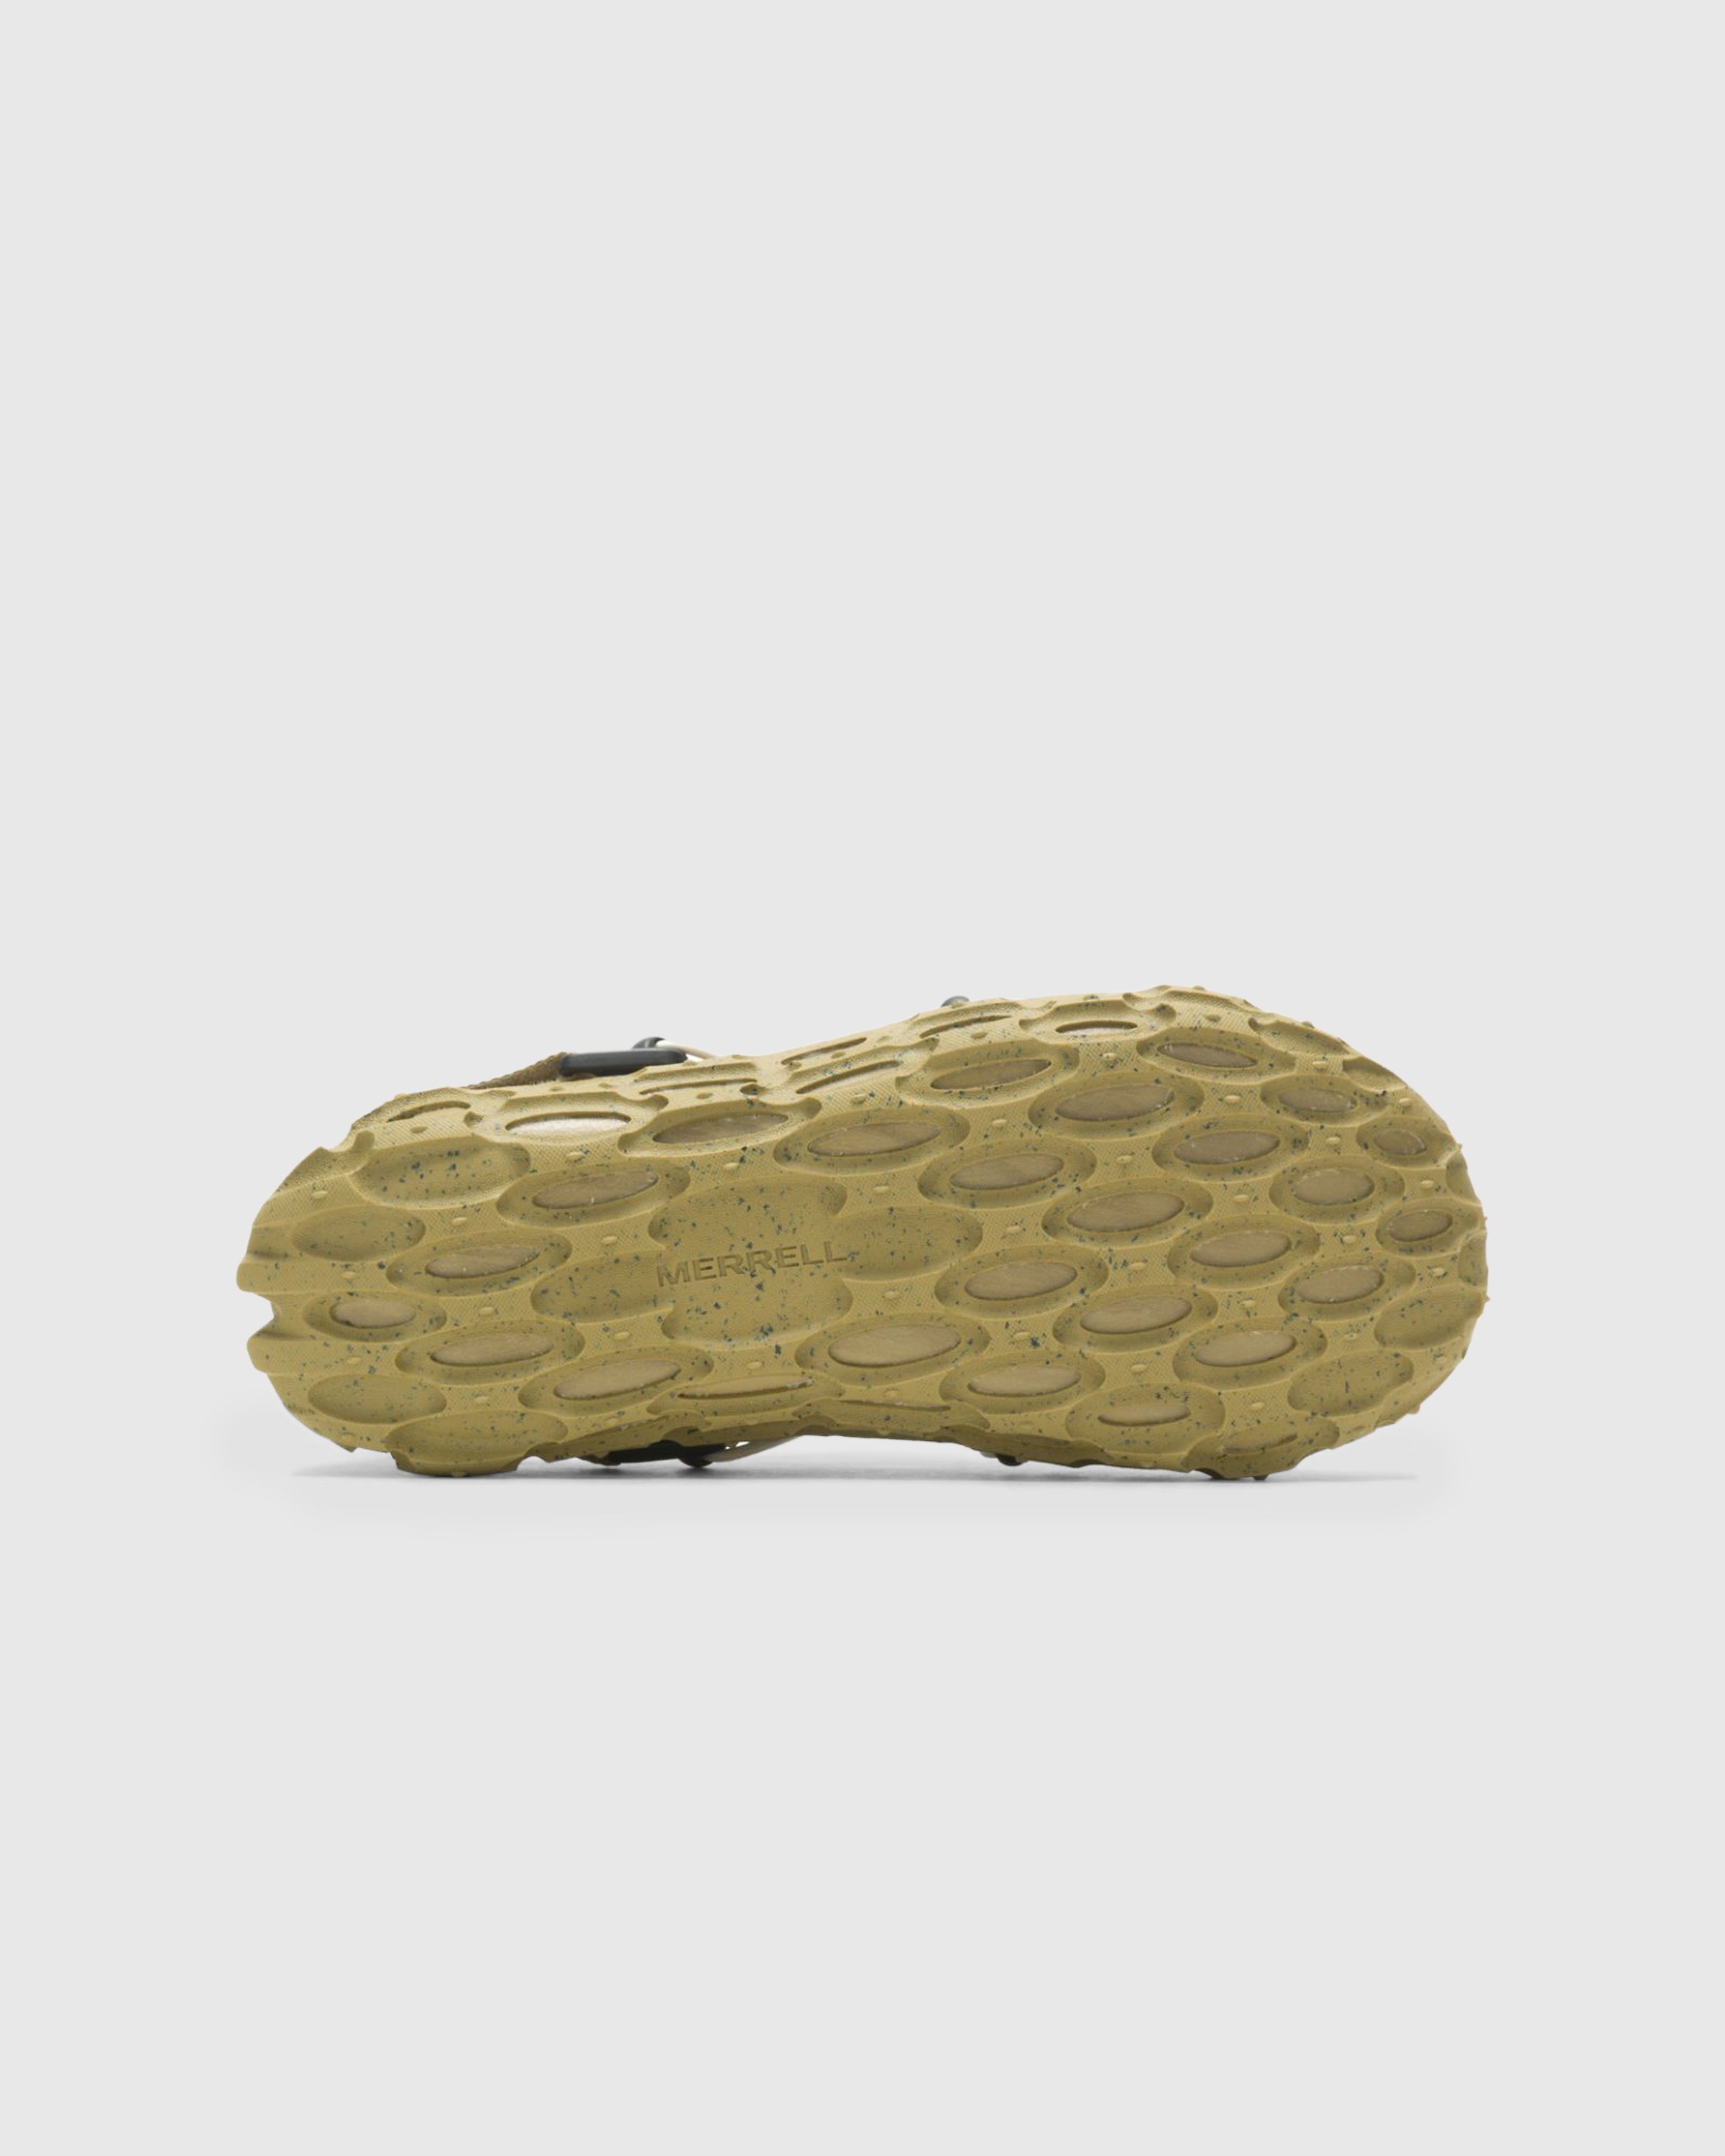 Merrell - Hydro Moc AT Cage 1TRL Green - Footwear - Green - Image 5